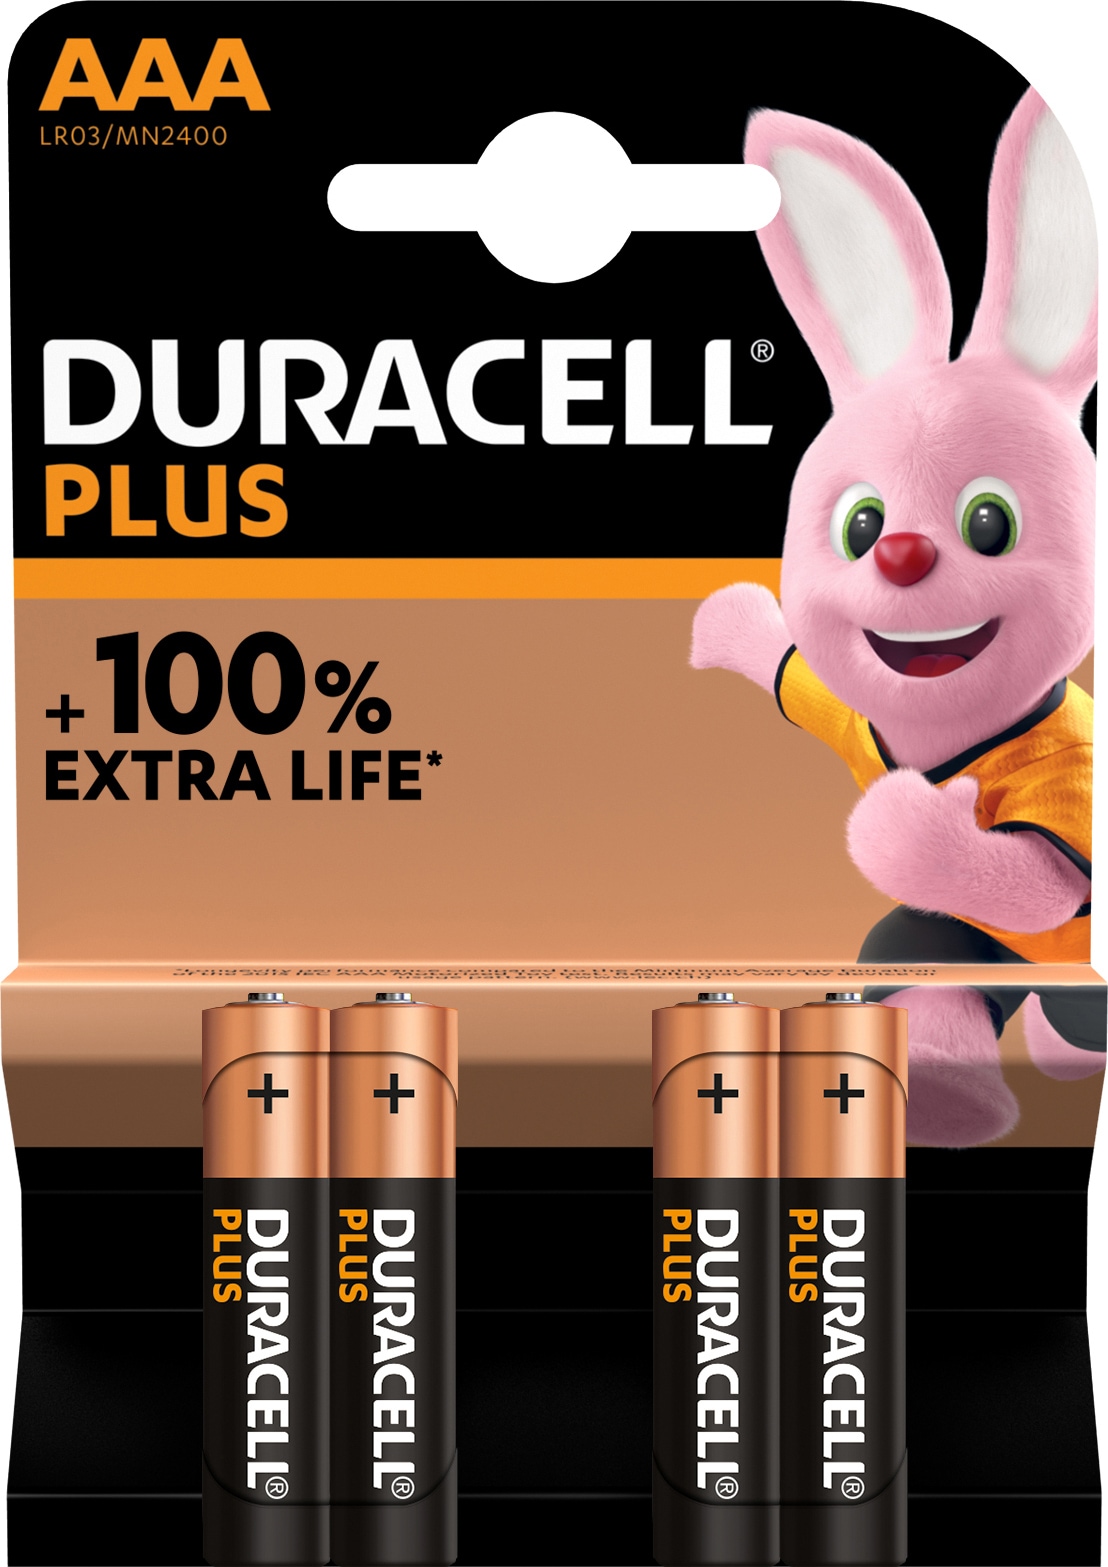 LR03 DURACELL PLUS AAA BL.4